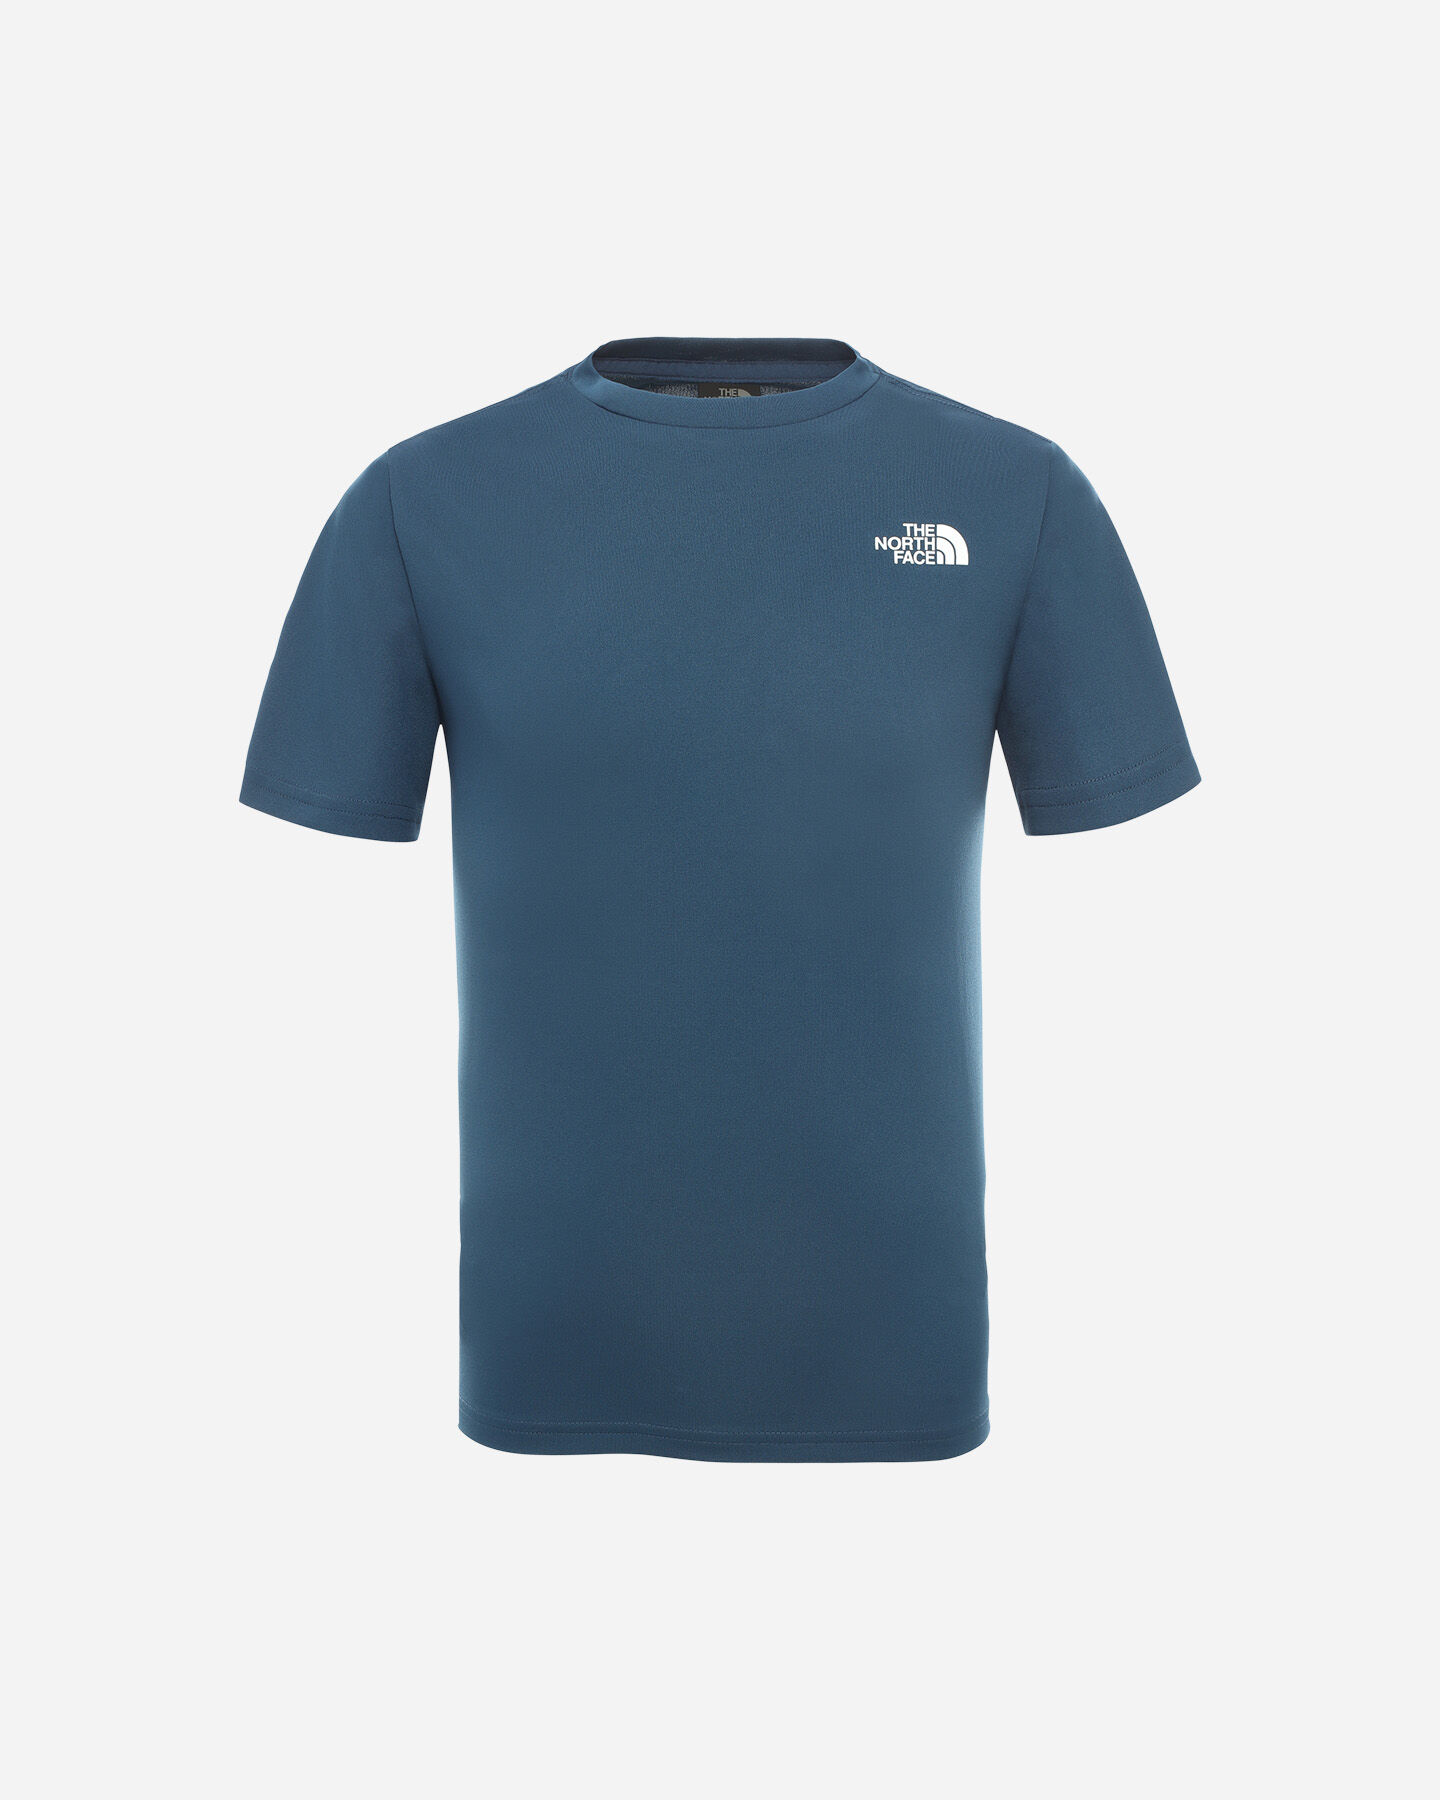  T-Shirt THE NORTH FACE REAXION 2.0 JR S5202373|N4L|XS scatto 0